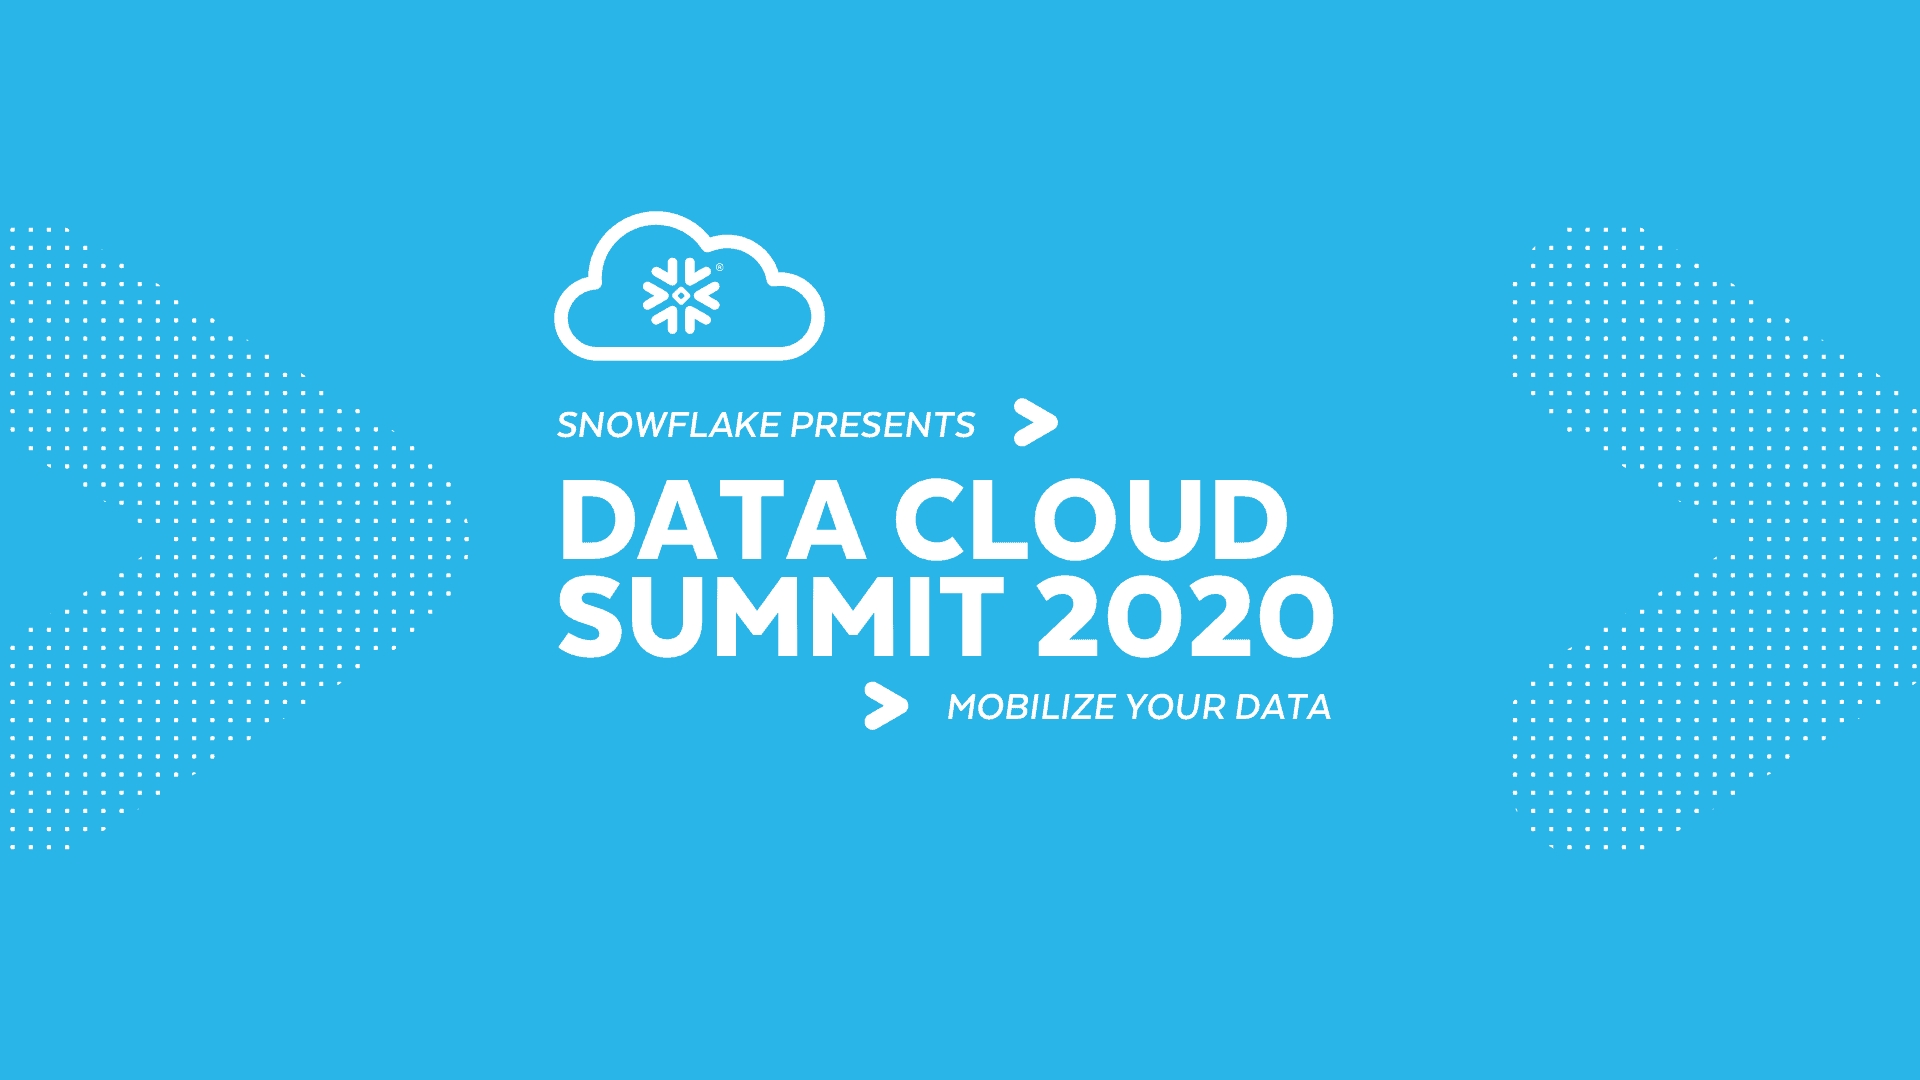 What to Expect from Data Cloud Summit 2020